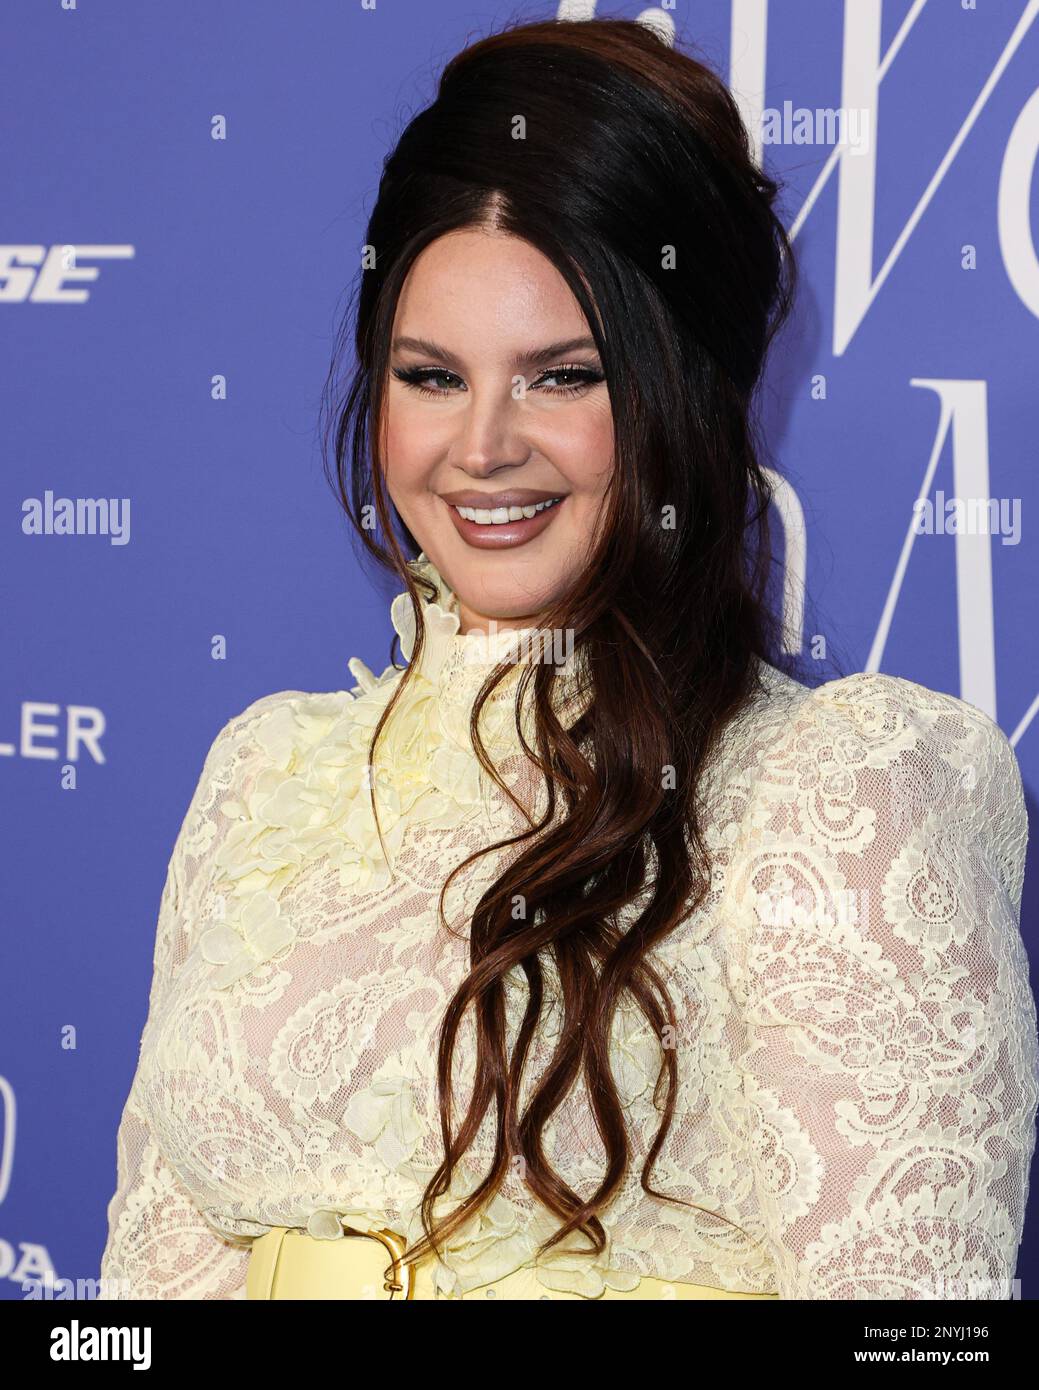 INGLEWOOD, LOS ANGELES, CALIFORNIA, USA - MARCH 01: Lana Del Rey wearing a Zimmermann dress arrives at the 2023 Billboard Women In Music held at the YouTube Theater on March 1, 2023 in Inglewood, Los Angeles, California, United States. (Photo by Xavier Collin/Image Press Agency) Stock Photo